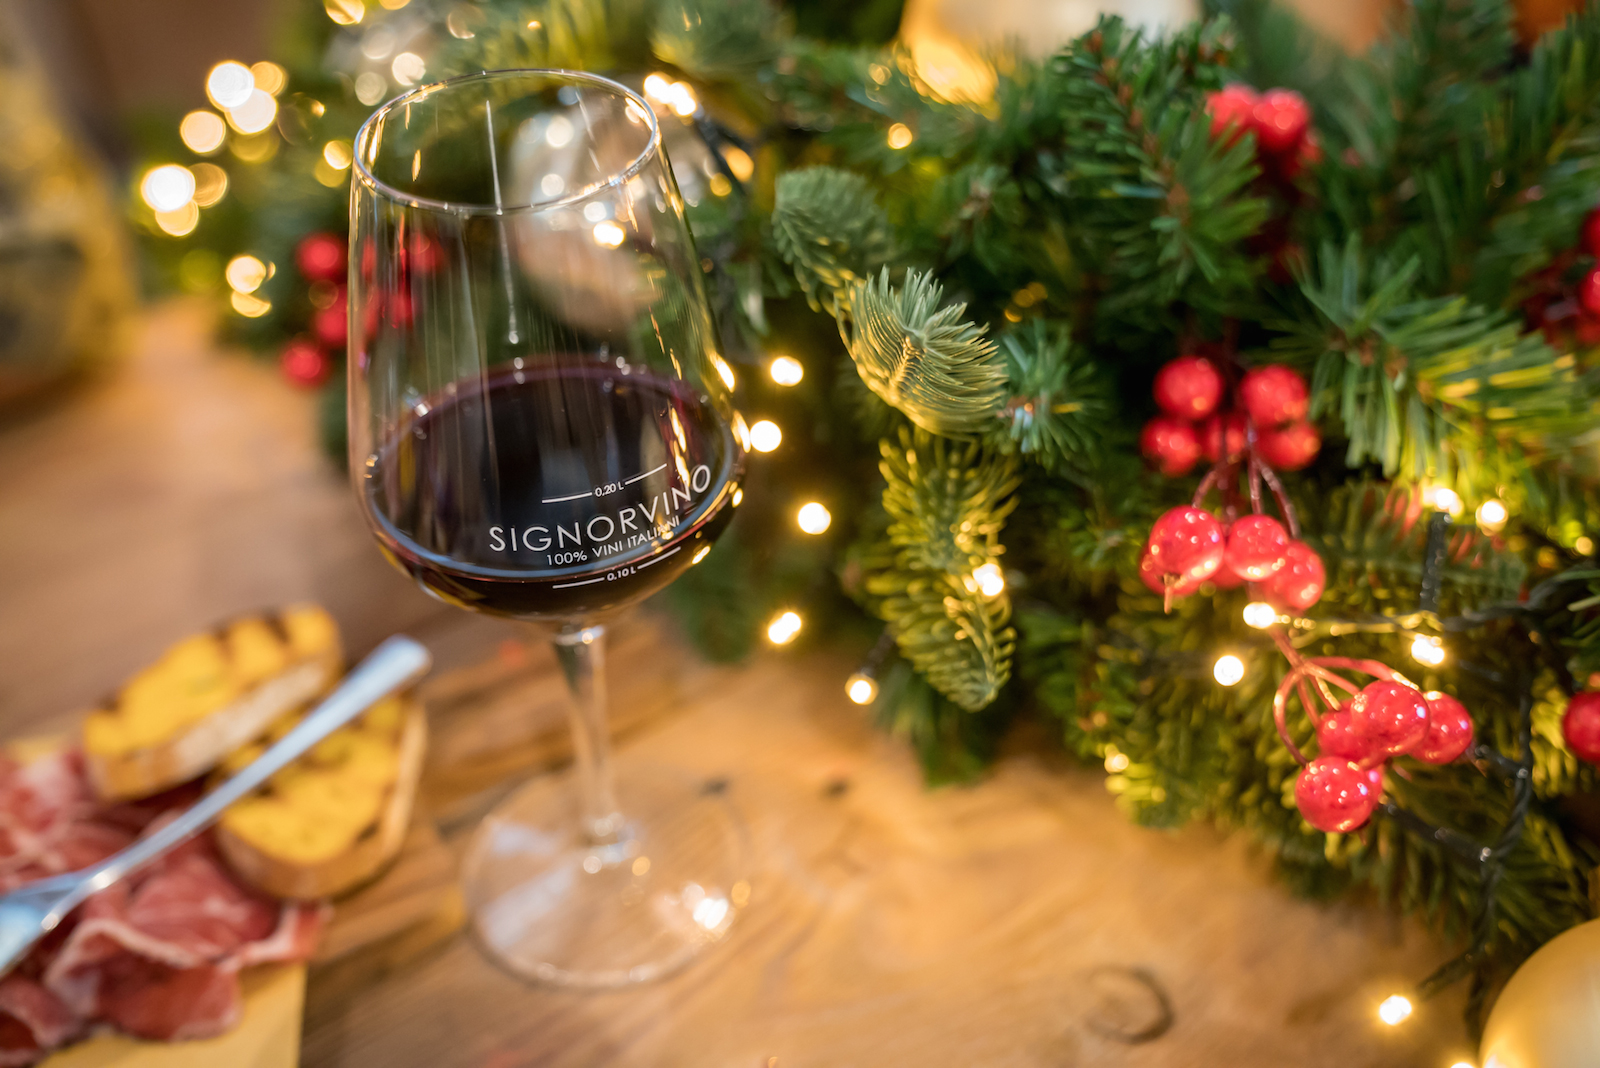 For a Mr. Christmas, we need a Signorvino! The proposals to give away